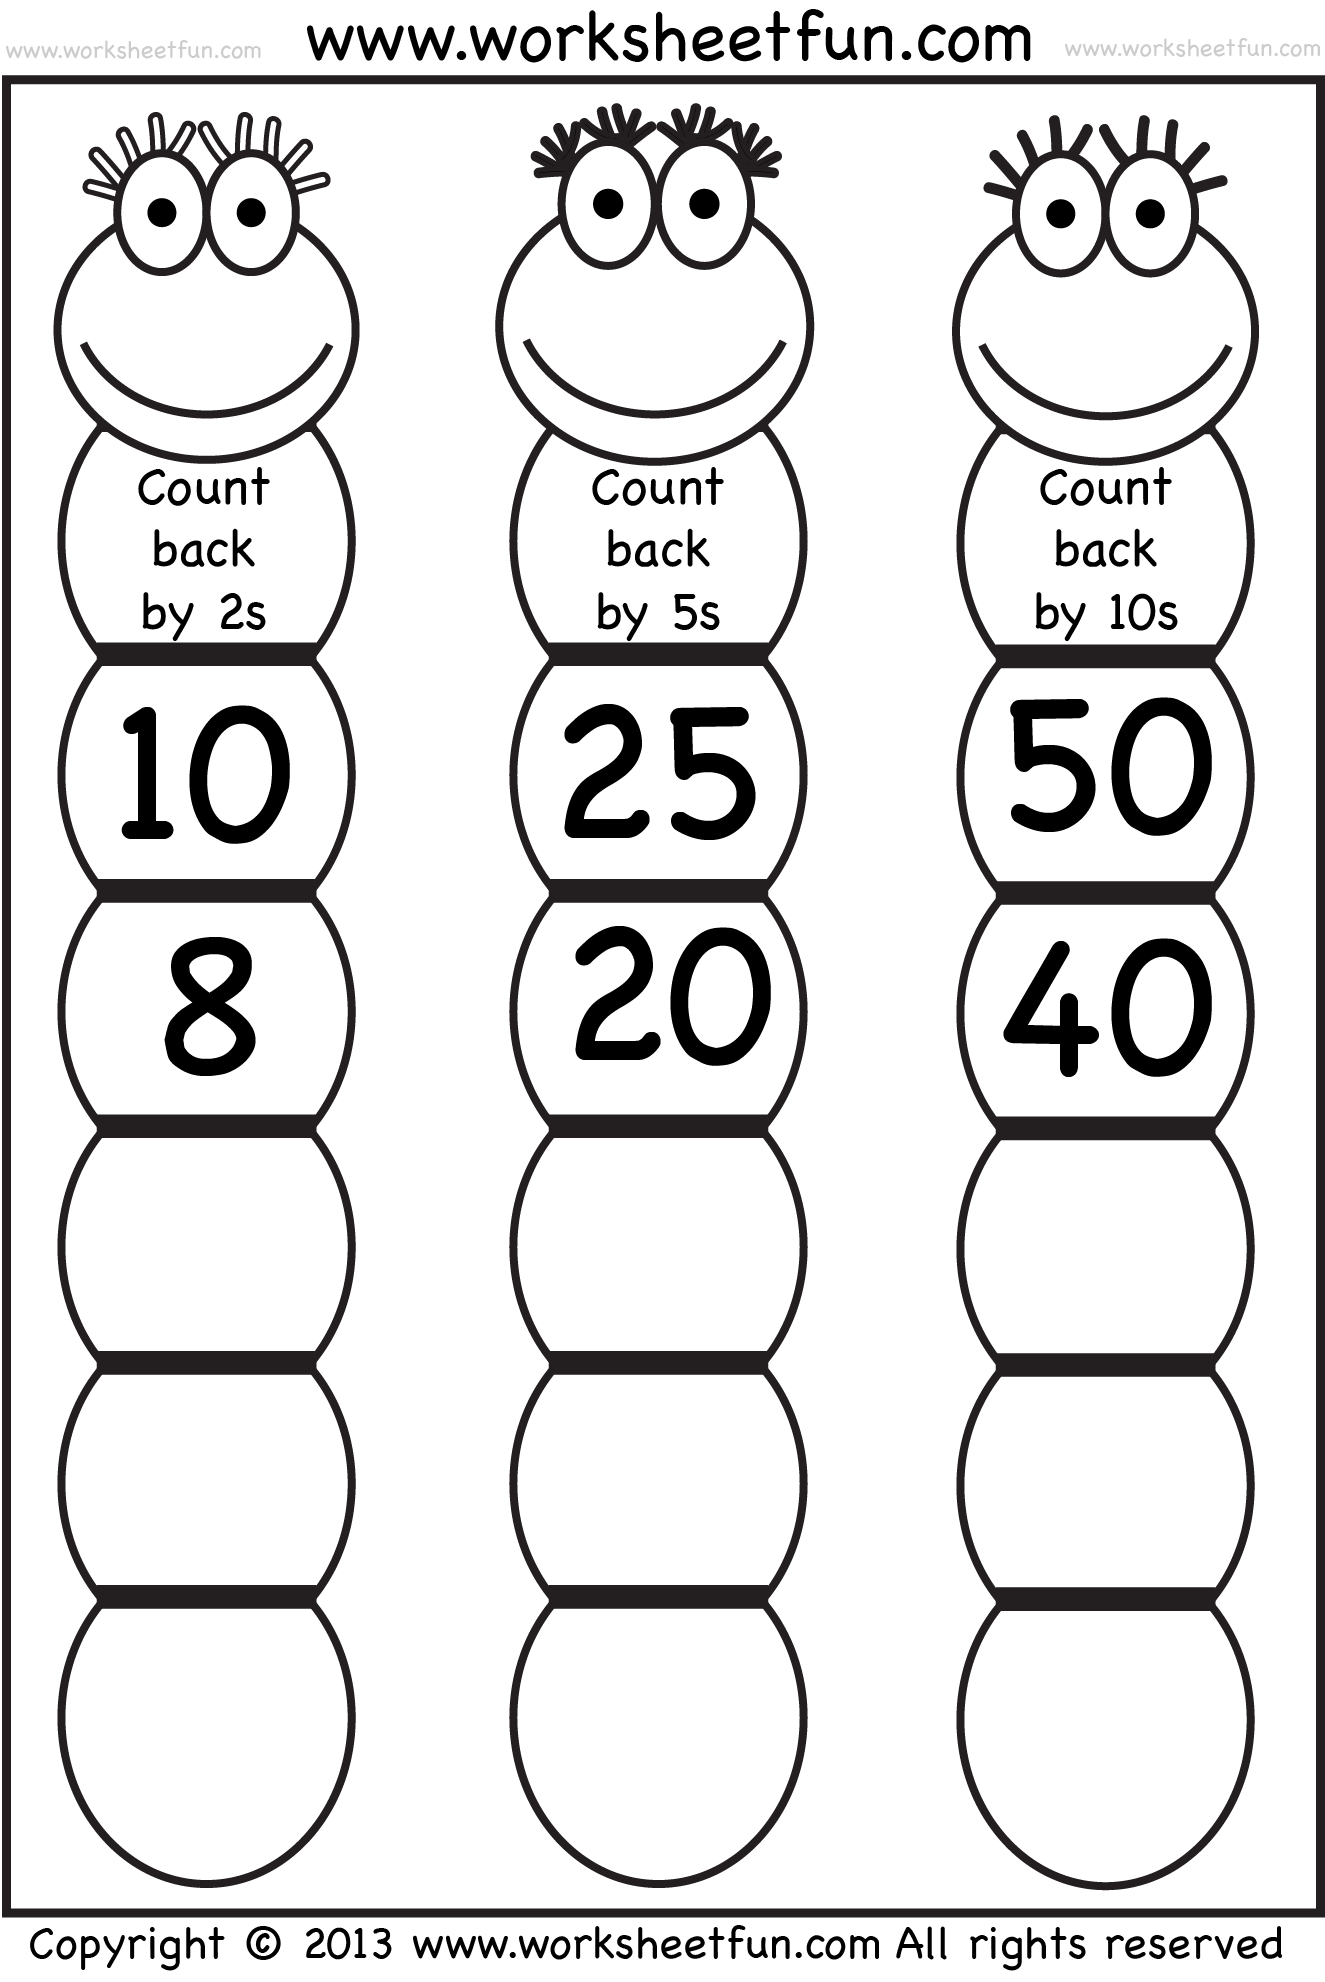 Skip Counting – Count Back by 20, 20 and 20 – Worksheet / FREE Throughout Counting By 10s Worksheet